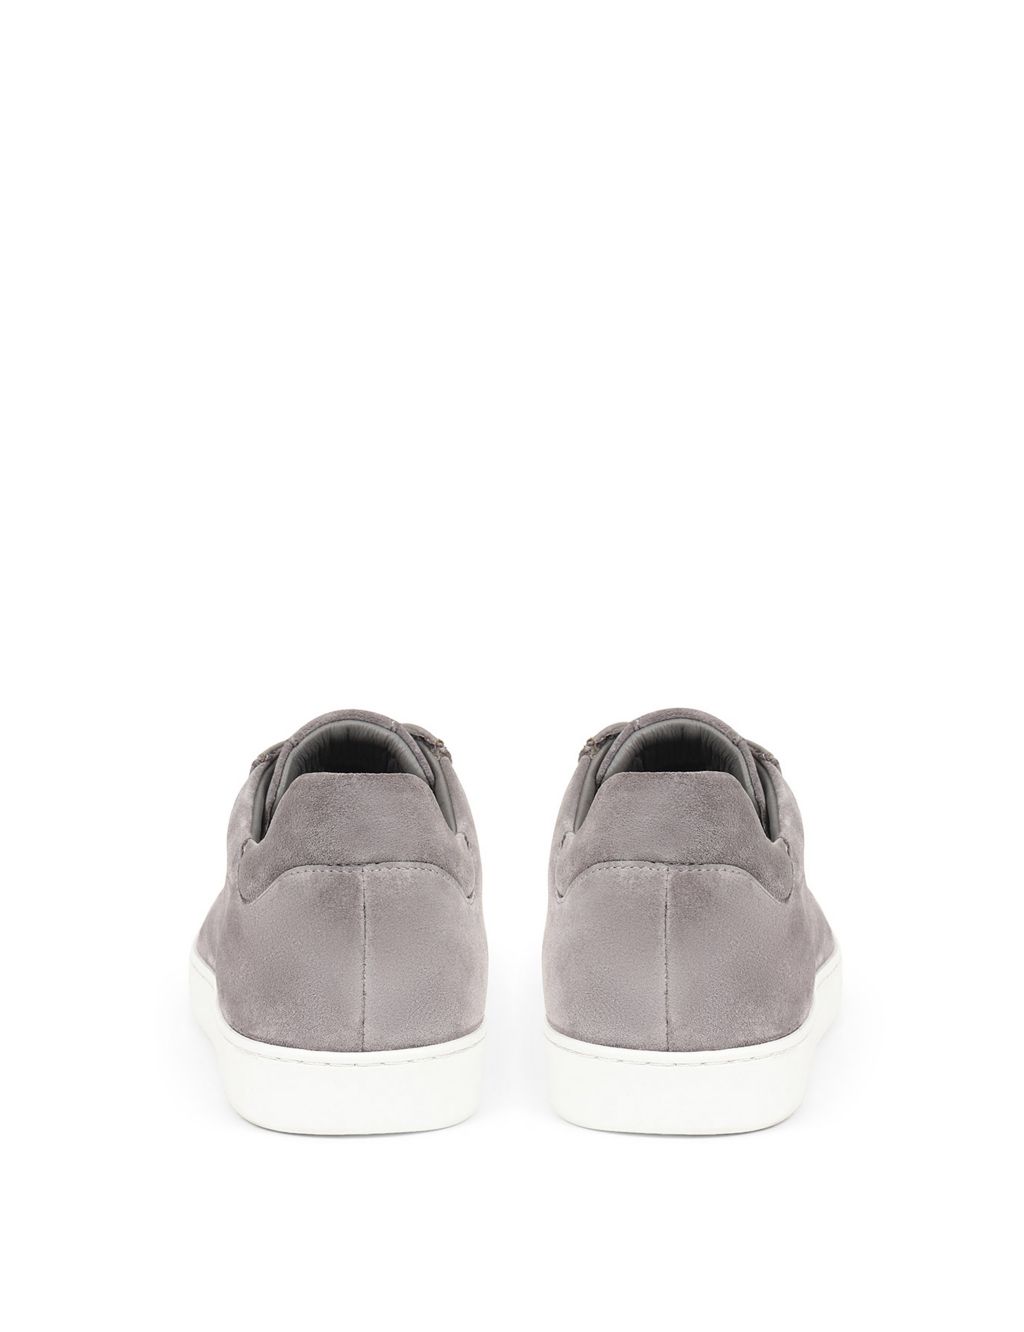 Suede Lace Up Trainers image 5